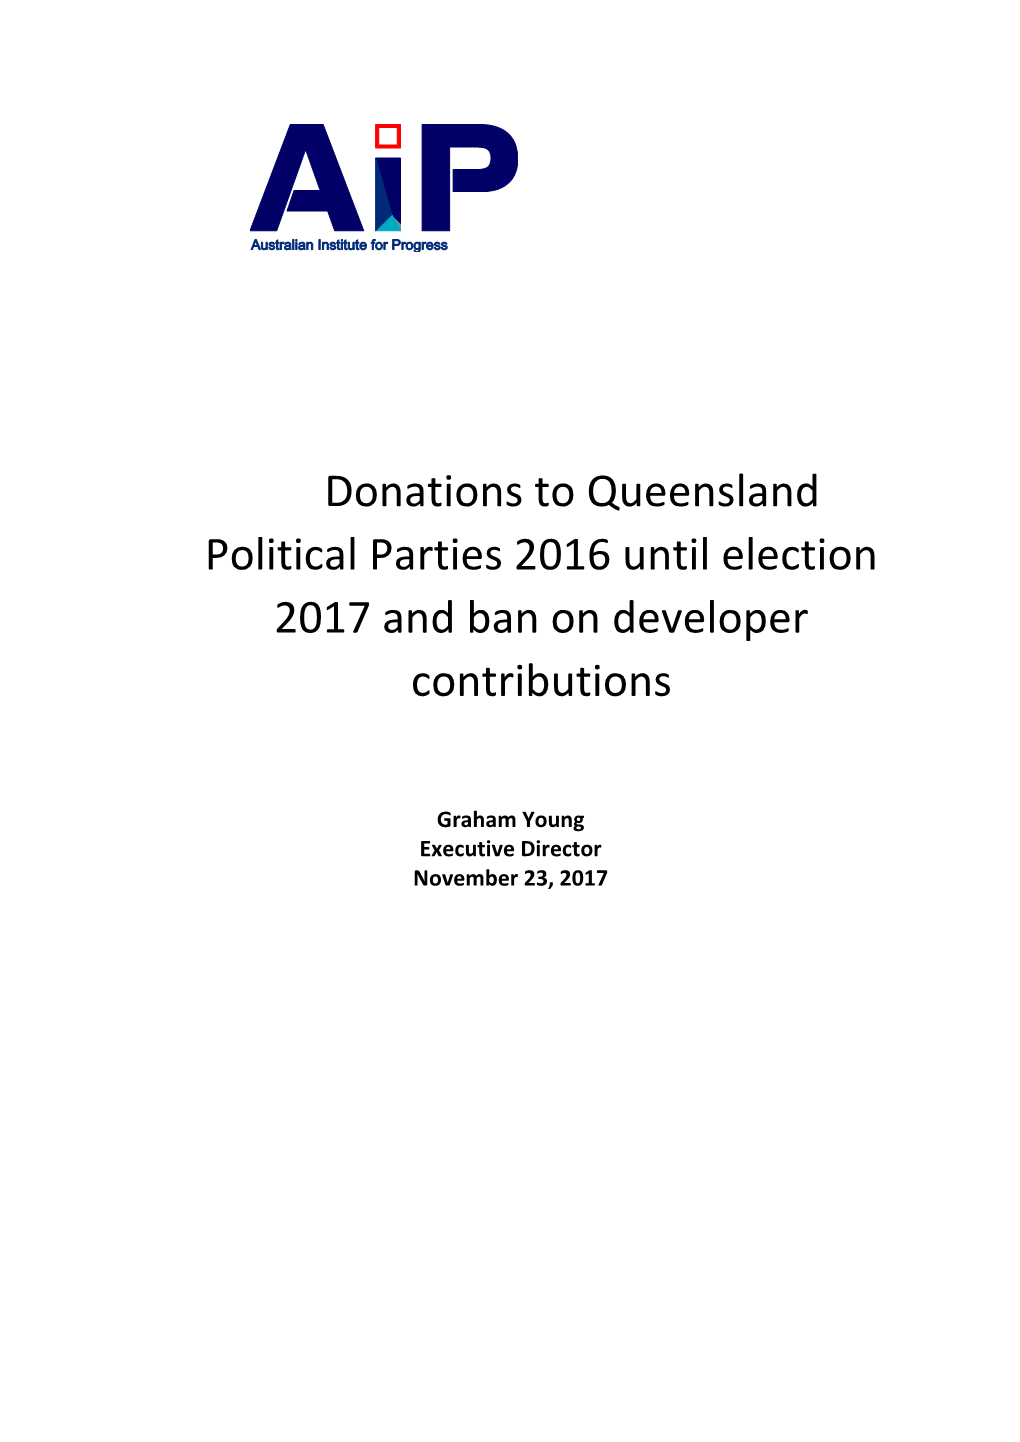 Donations to Queensland Political Parties 2016 Until Election 2017 and Ban on Developer Contributions